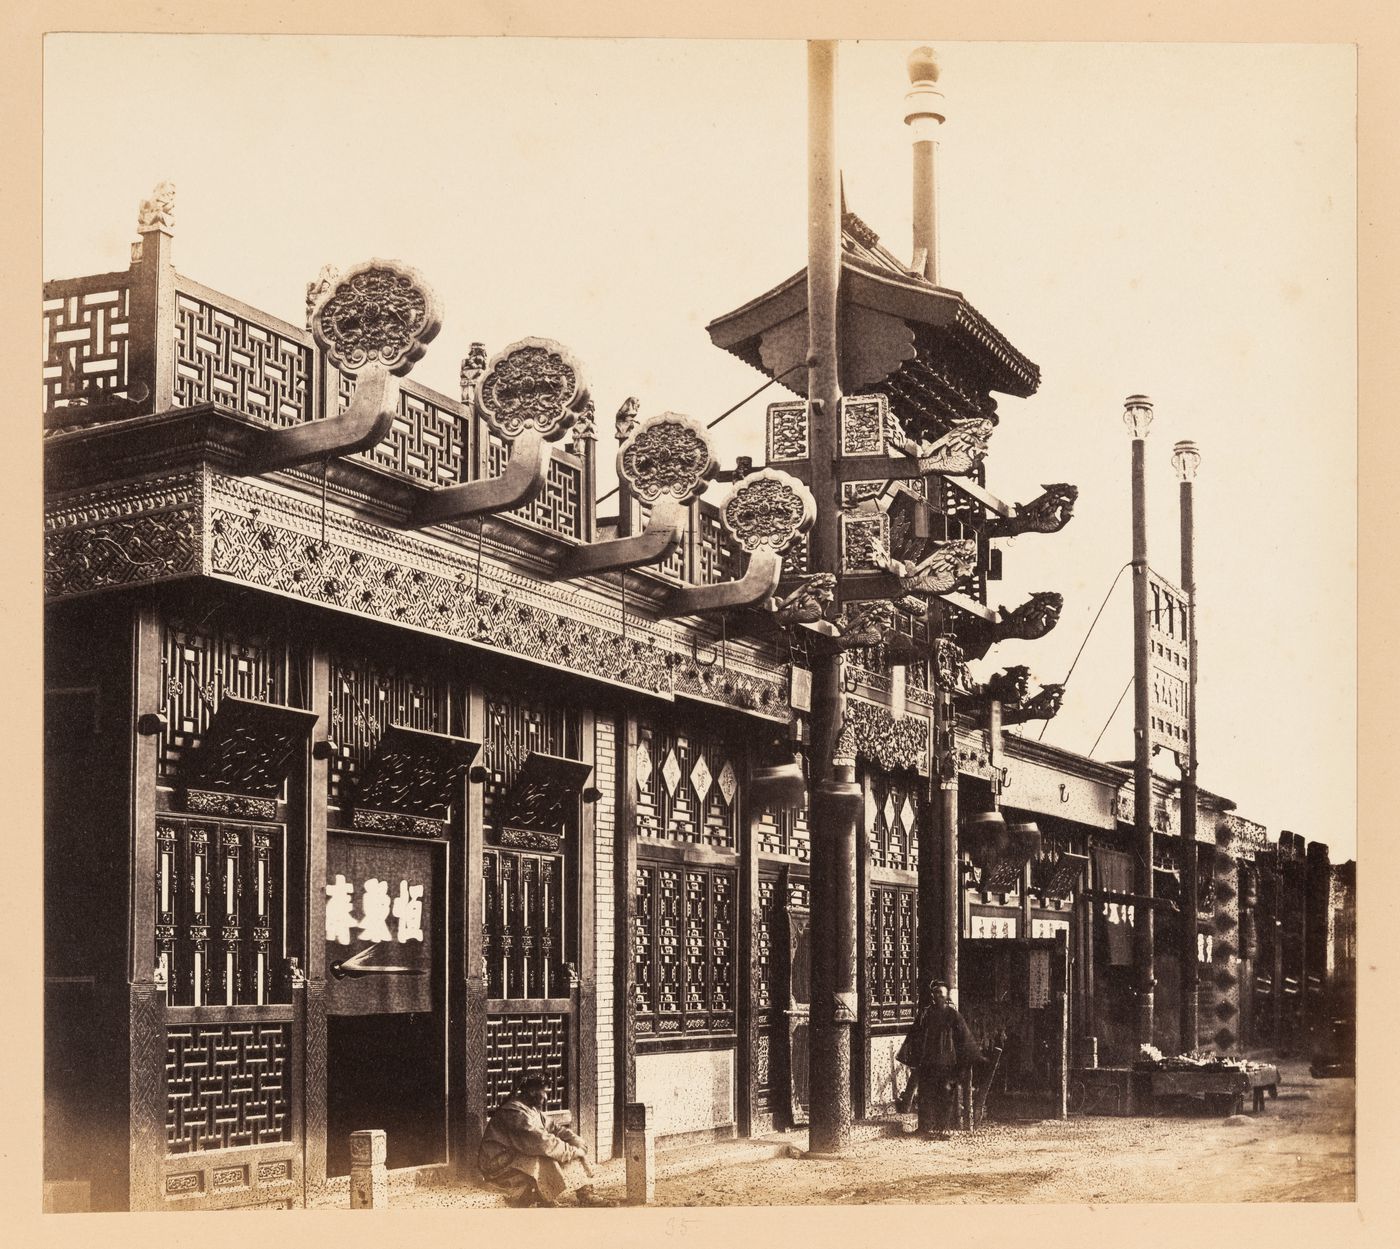 View of shops in a street in the Outer City (also known as the Chinese City), Peking (now Beijing), China